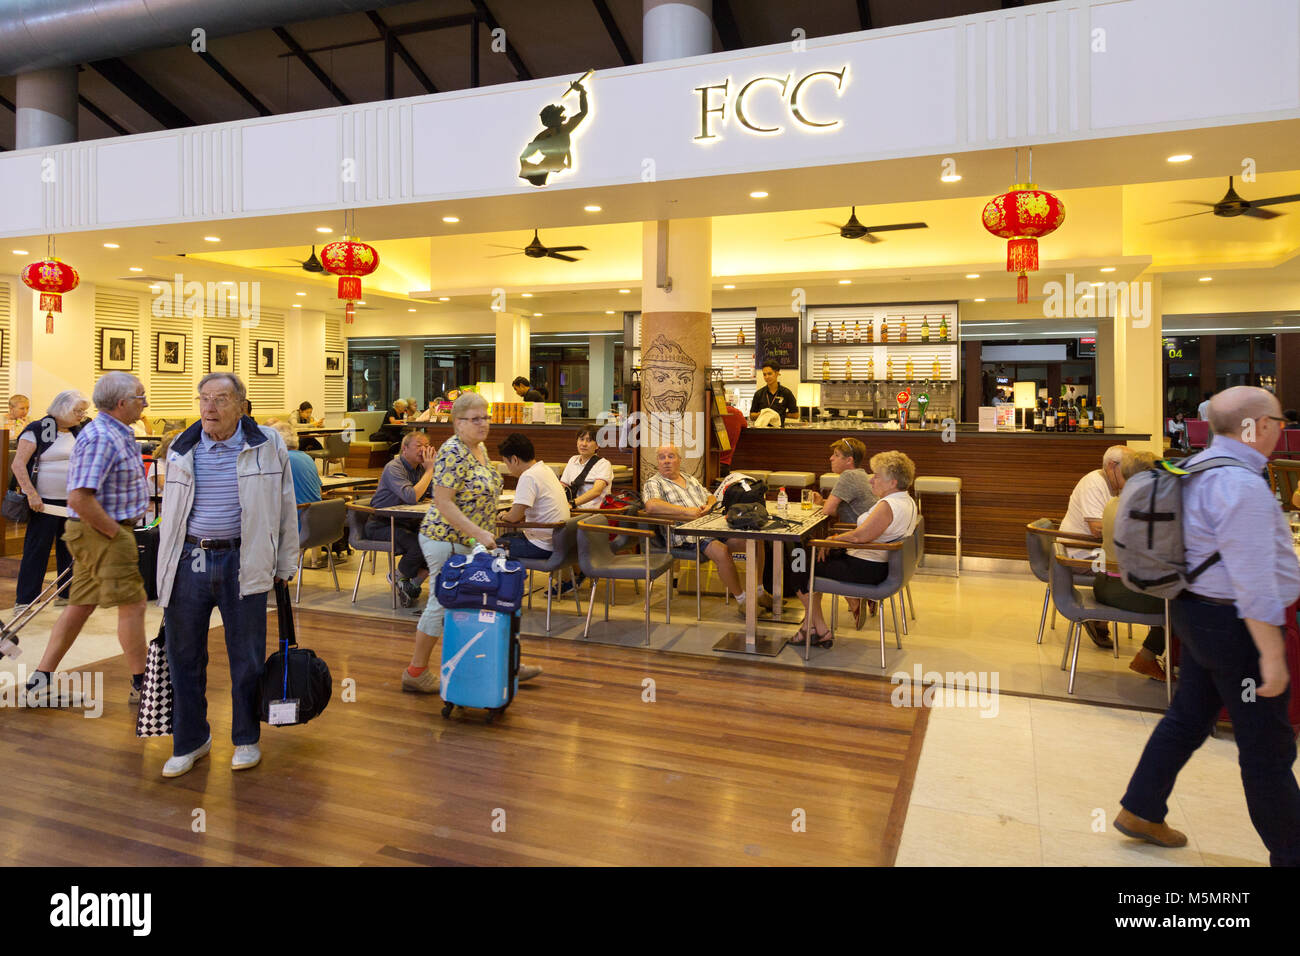 Foreign Correspondents Club Cafe in Departures, Terminal building, Ho Chi Minh airport ( Tan Son Nhat International airport ), Vietnam, Asia Stock Photo